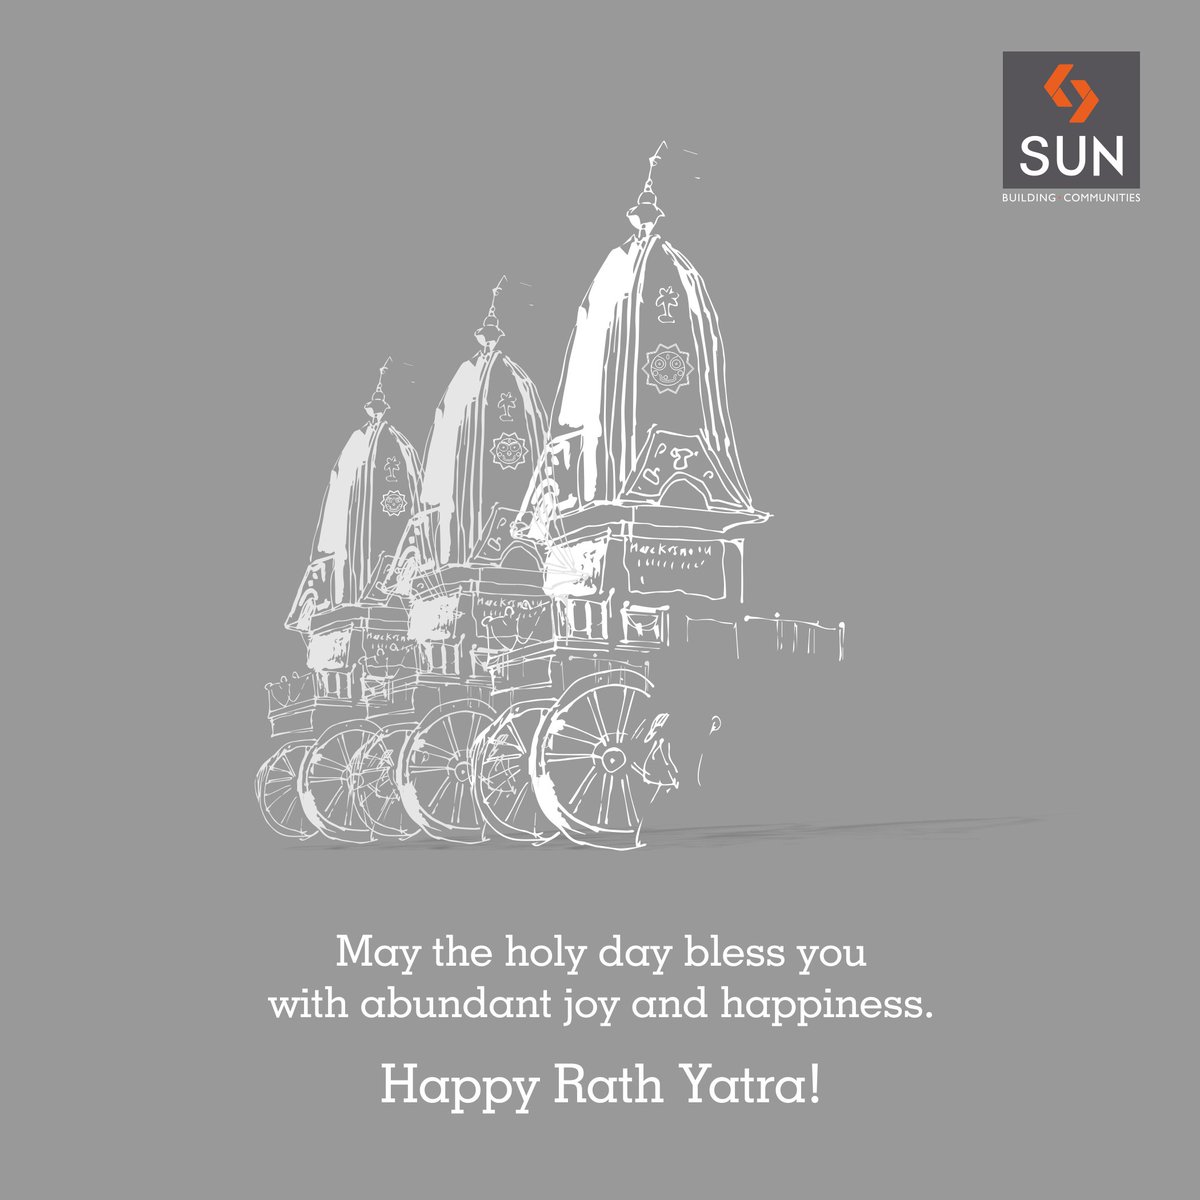 Celebrating the festival with joy and happiness. 
Happy #RathYatra to everyone! https://t.co/c7AbywyATR